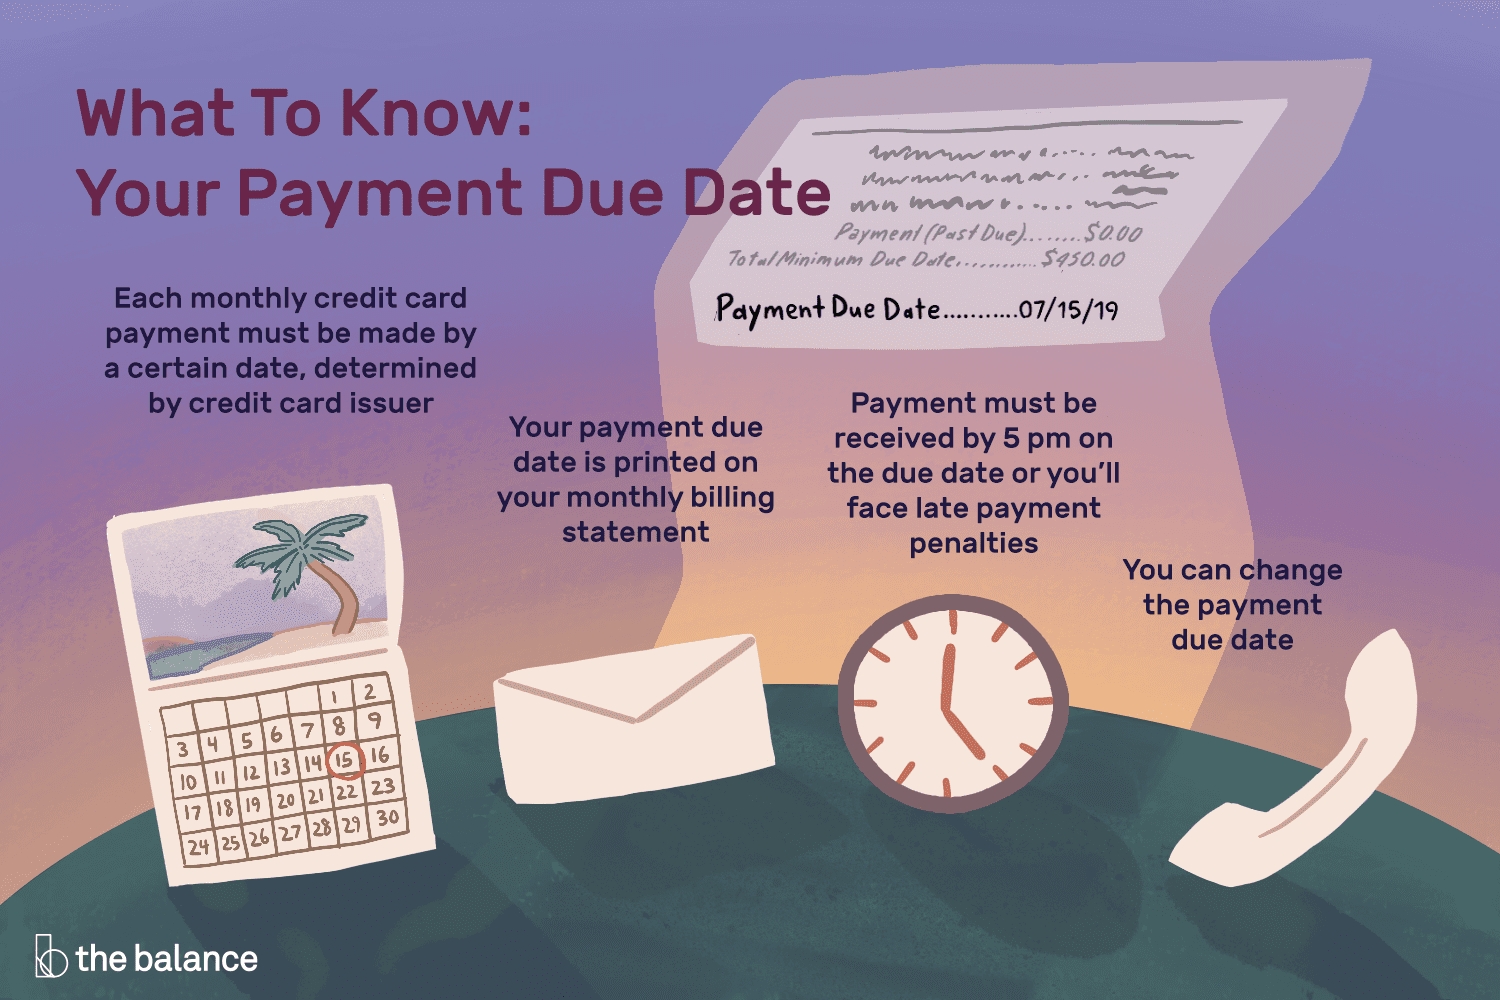 What To Know About Your Payment Due Date